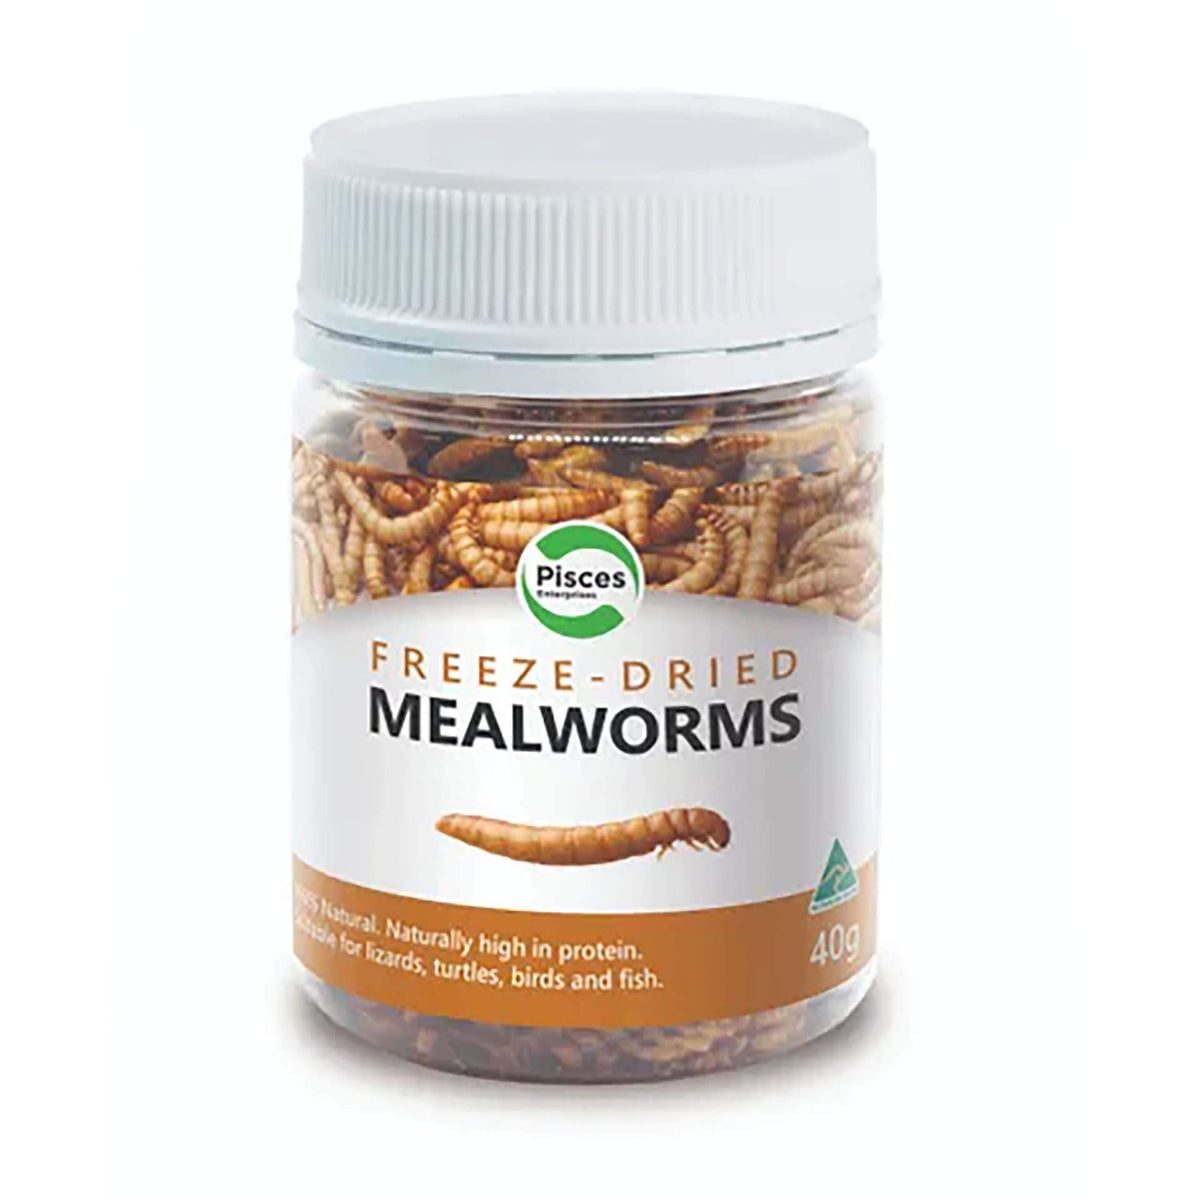 Pisces Freeze-dried Mealworms 40g